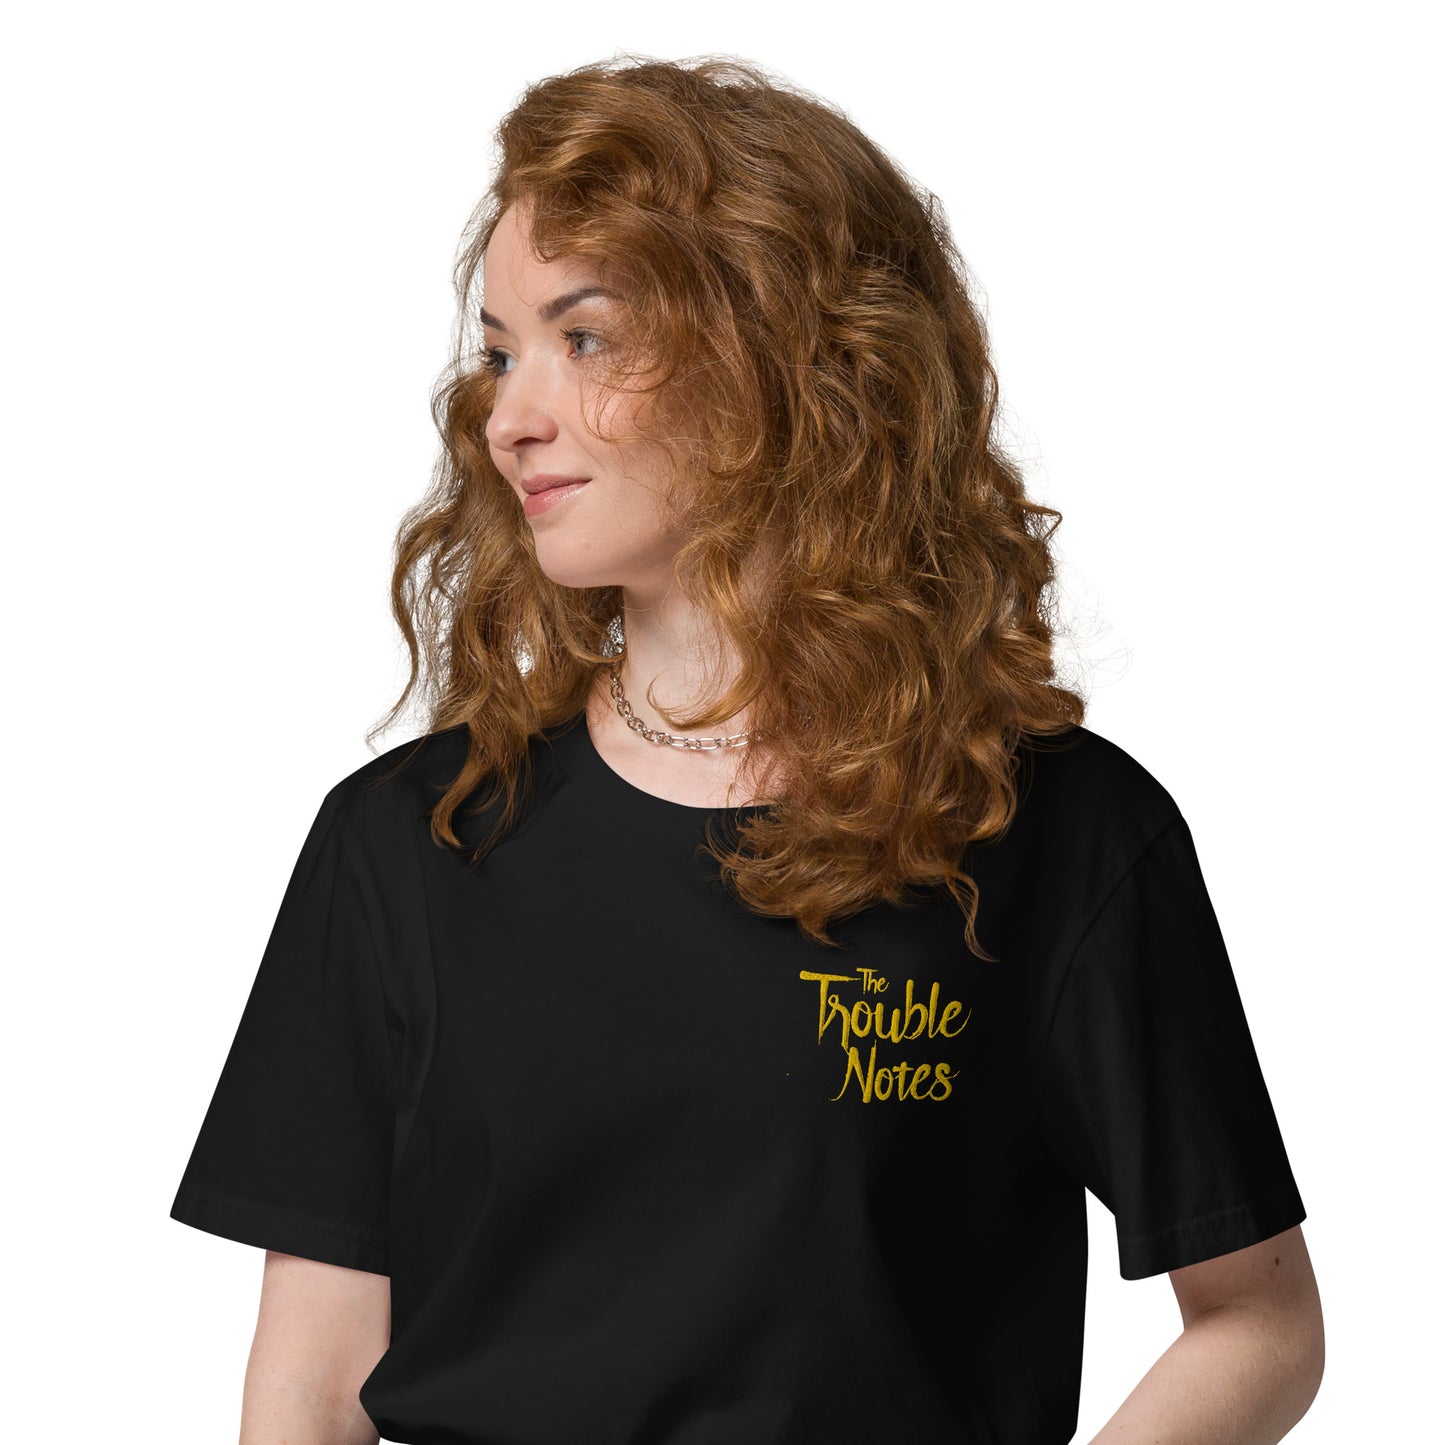 The Trouble Notes "Minimalistic Logo" GOLD (Embroidered) Unisex Organic Cotton T-shirt